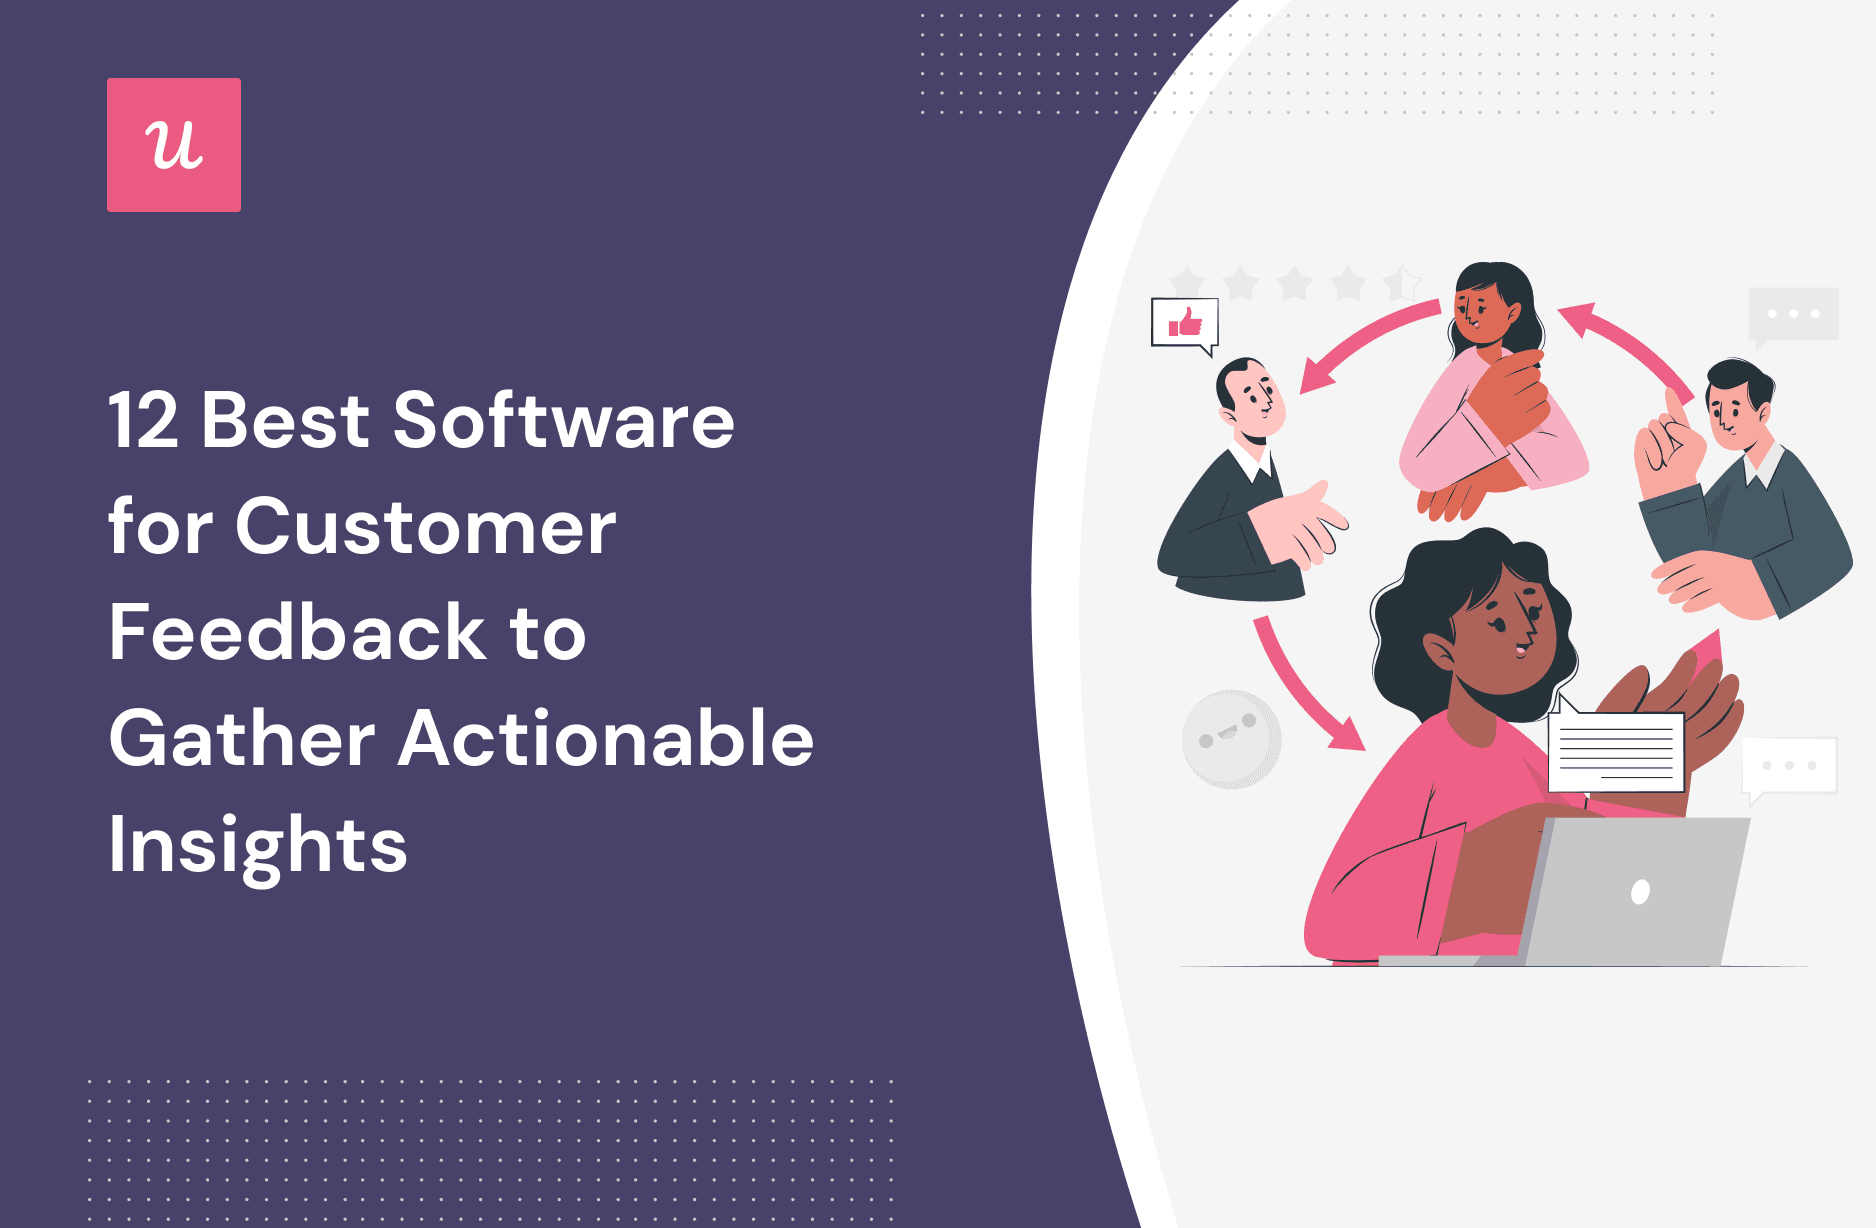 12 Best Software for Customer Feedback to Gather Actionable Insights cover